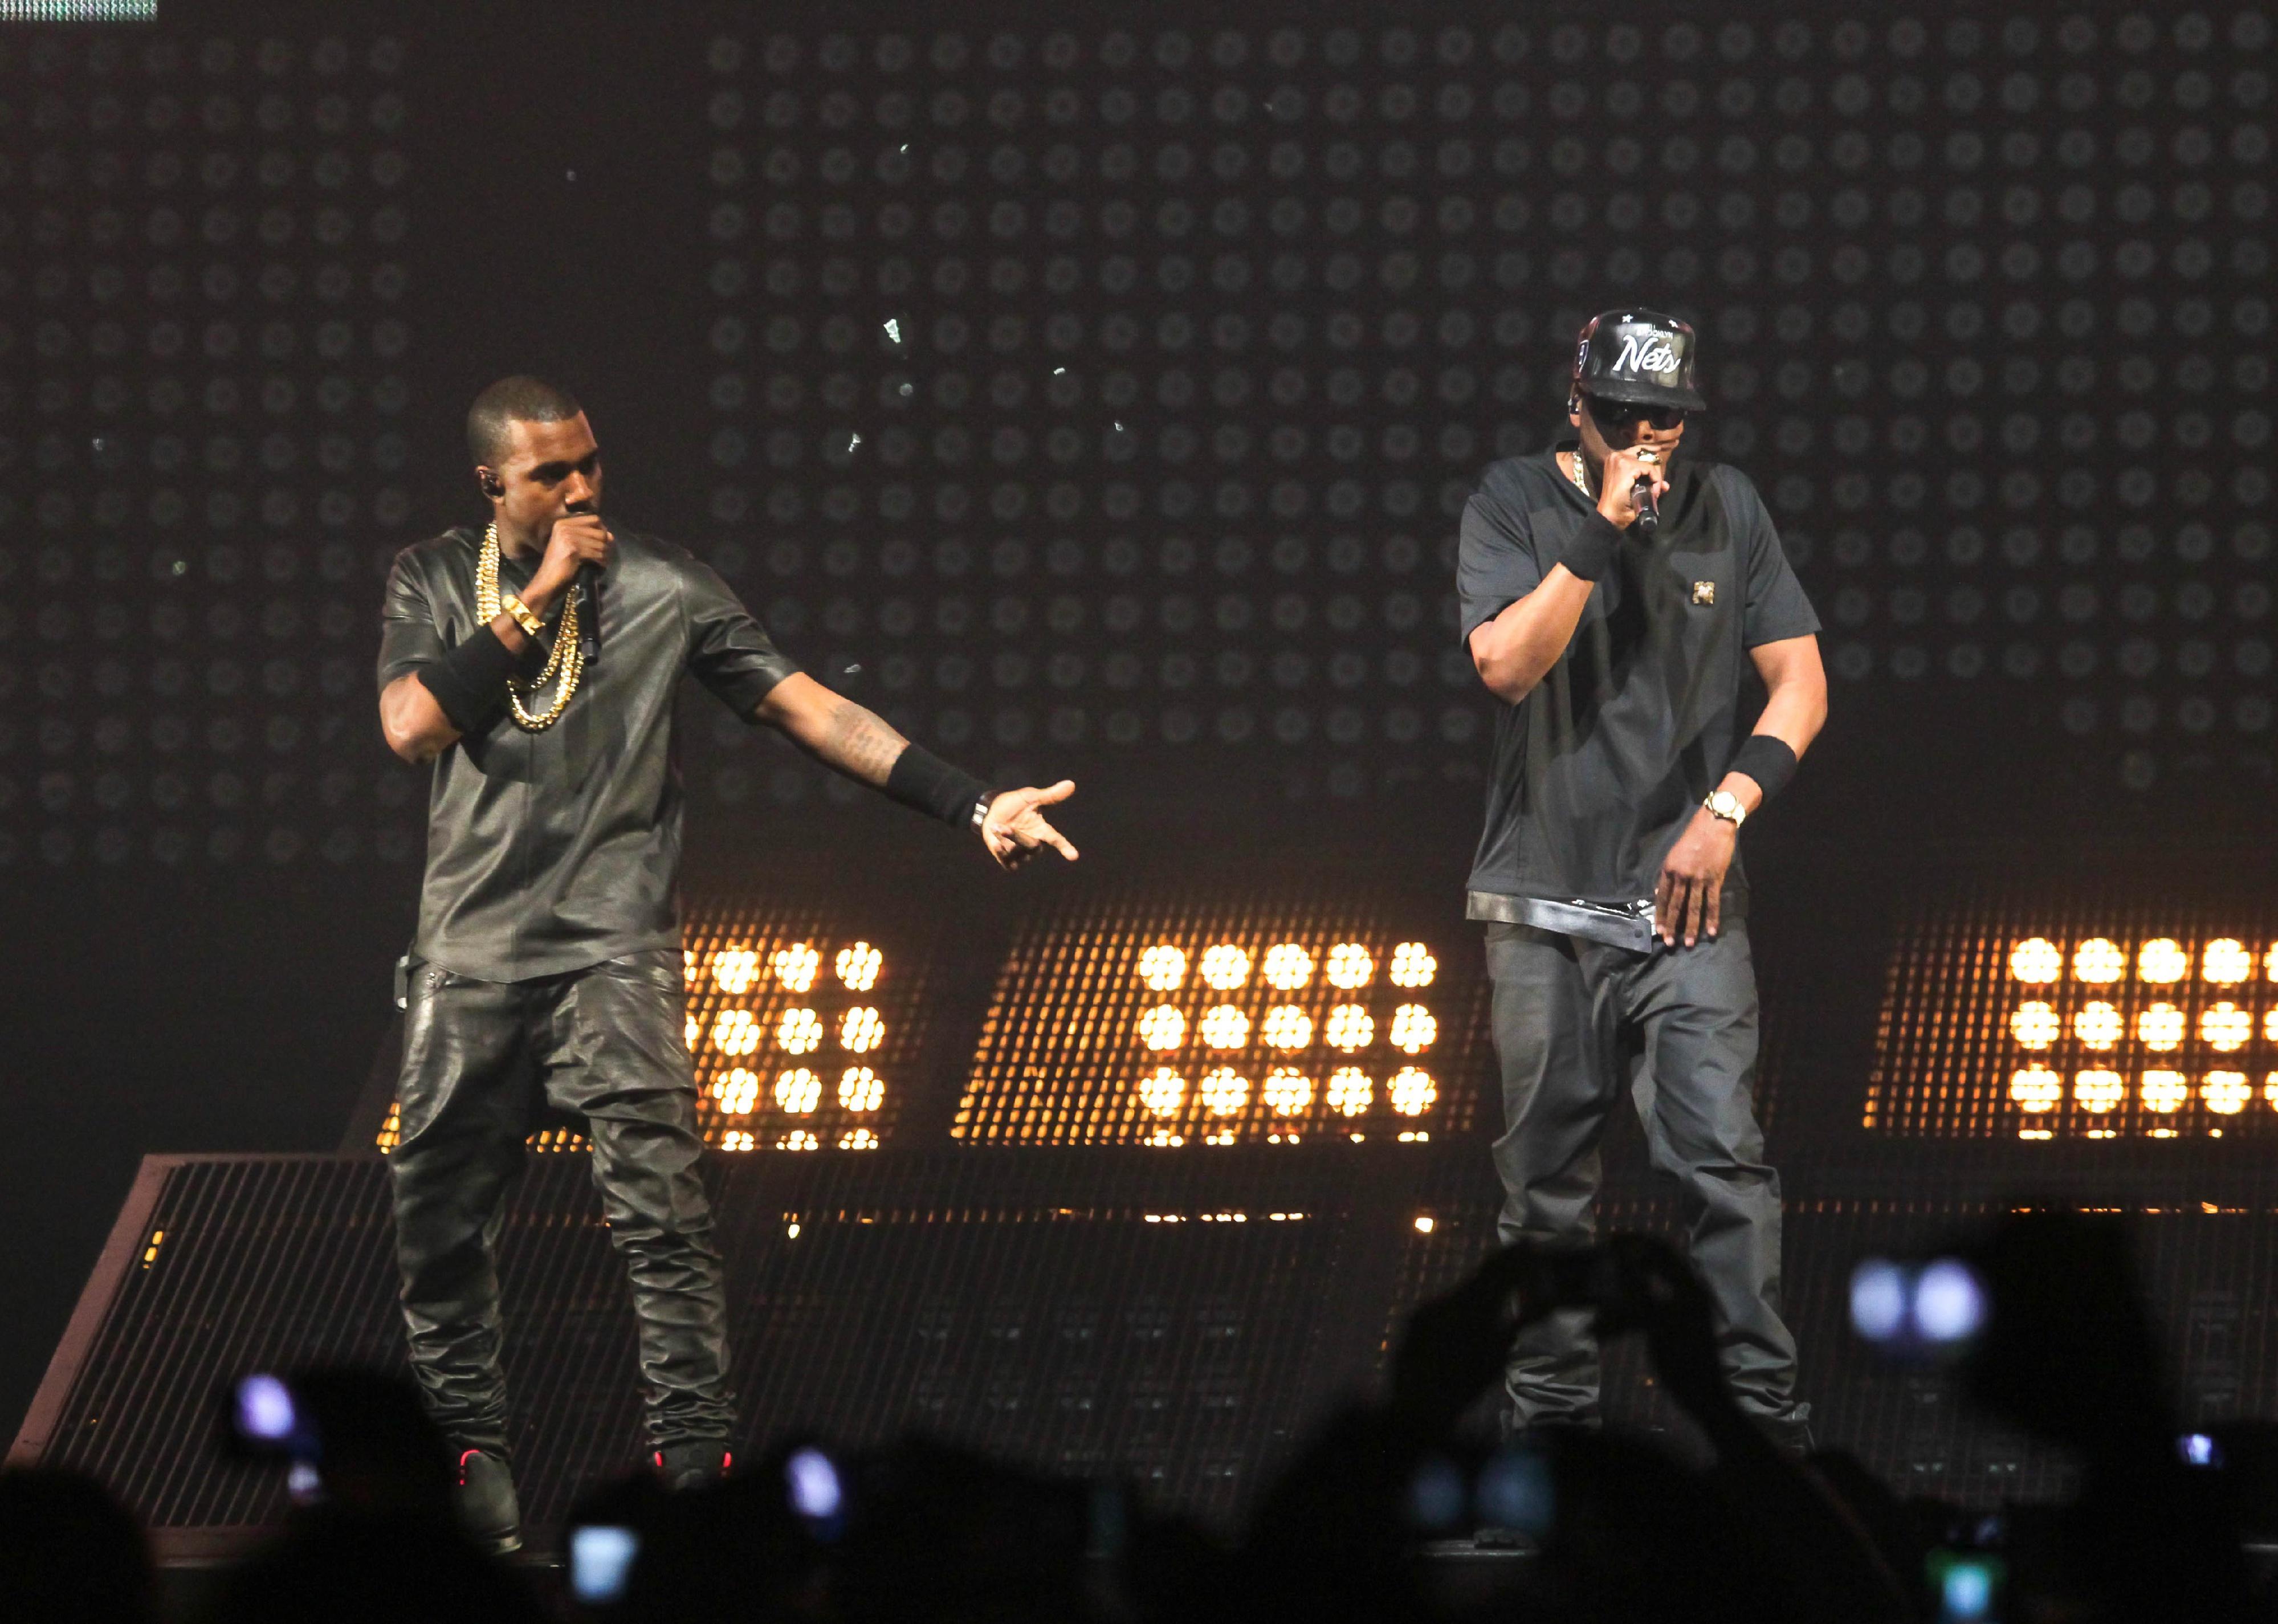 <p>Hip-hop collaborators Jay-Z and Kanye West followed their 2011 album "Watch the Throne" with this successful tour of the same name. At a show in Paris, the duo performed one of their most beloved songs 11 times in a row to a rapturous crowd.</p>